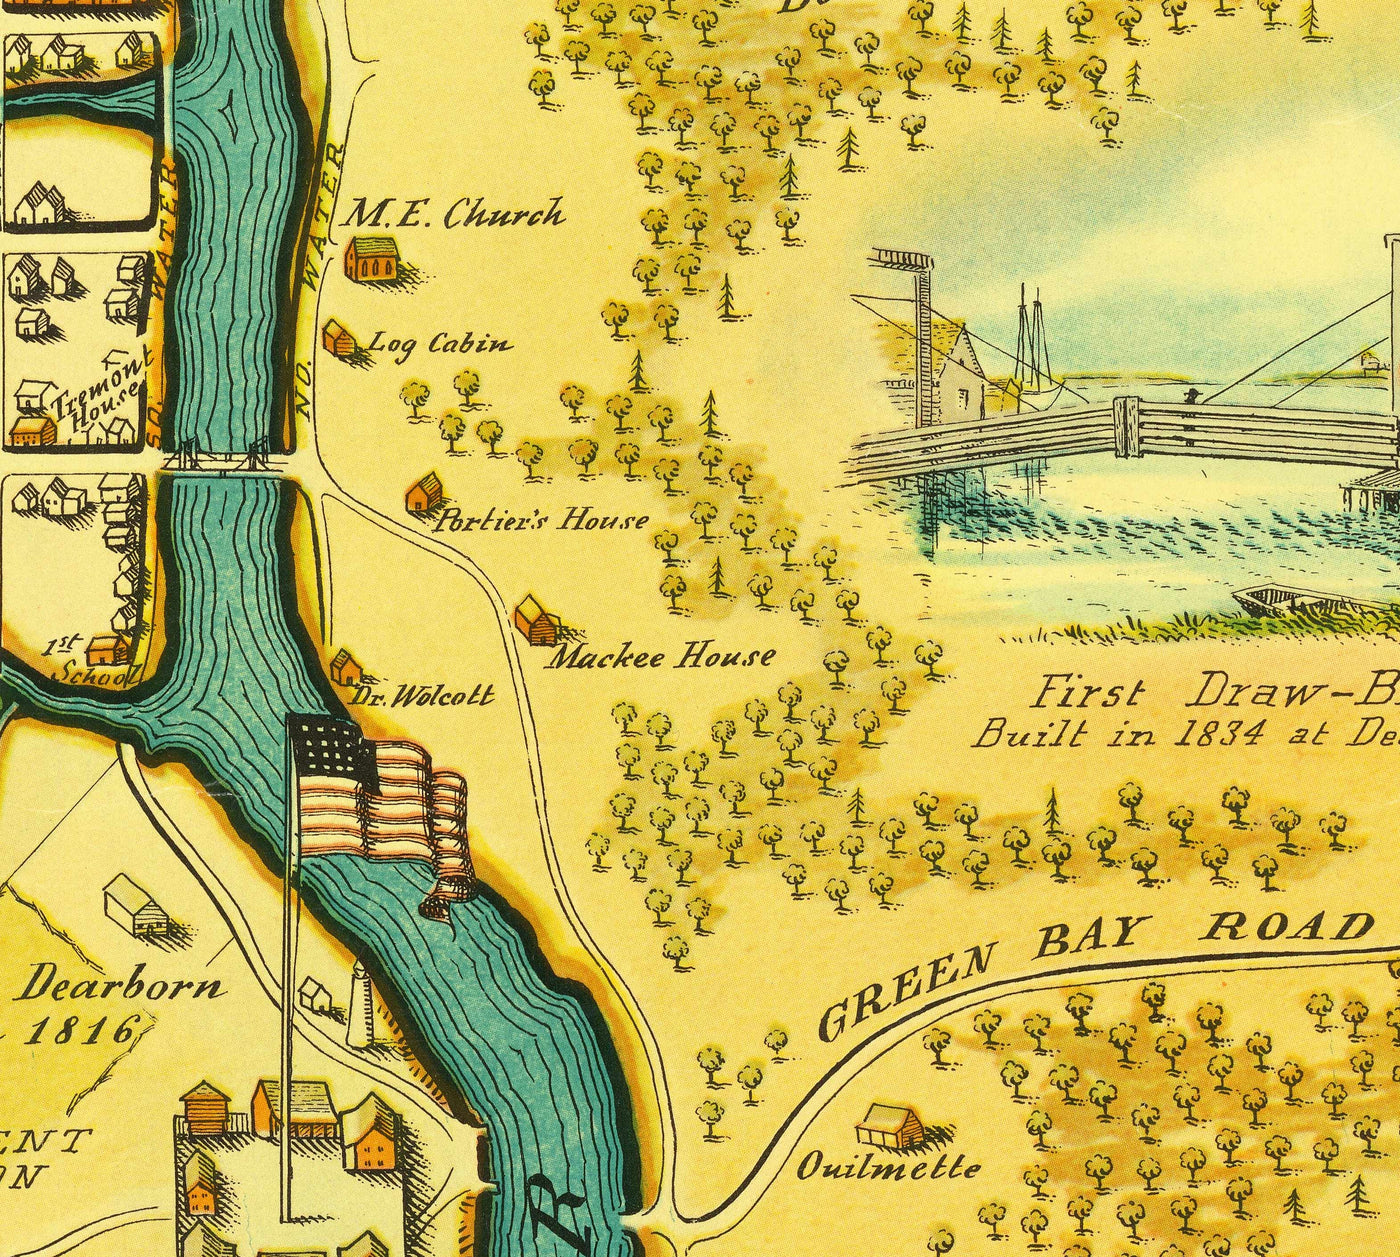 Old Map of Chicago, 1833 by Stelzer & Conley - 350 Pop. Town - Lake Michigan, Downtown, Chicago River